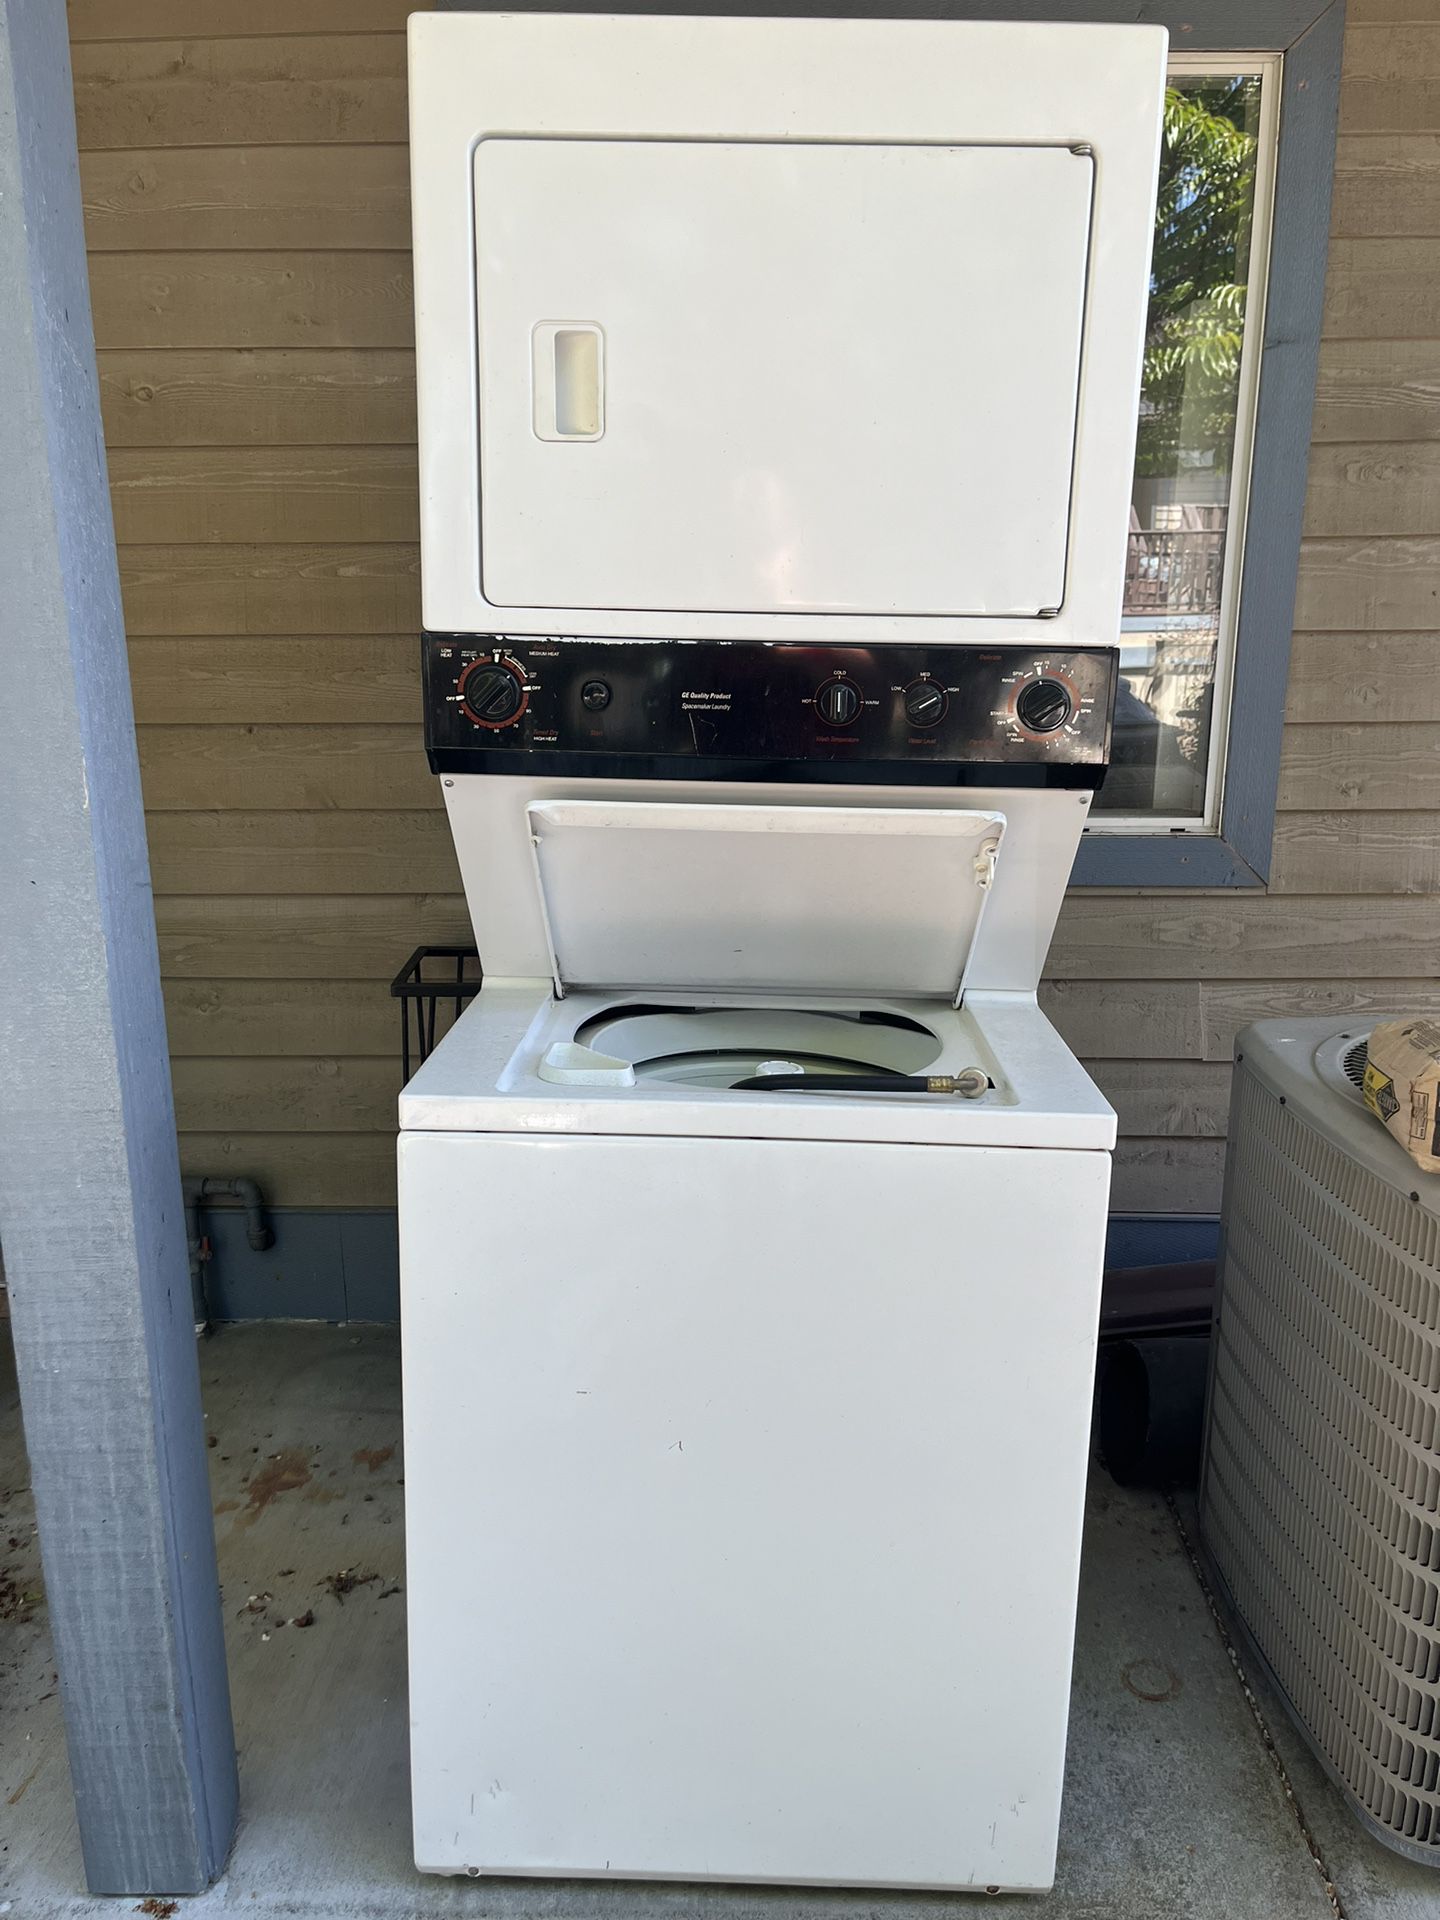 GESpace maker washer And dryer